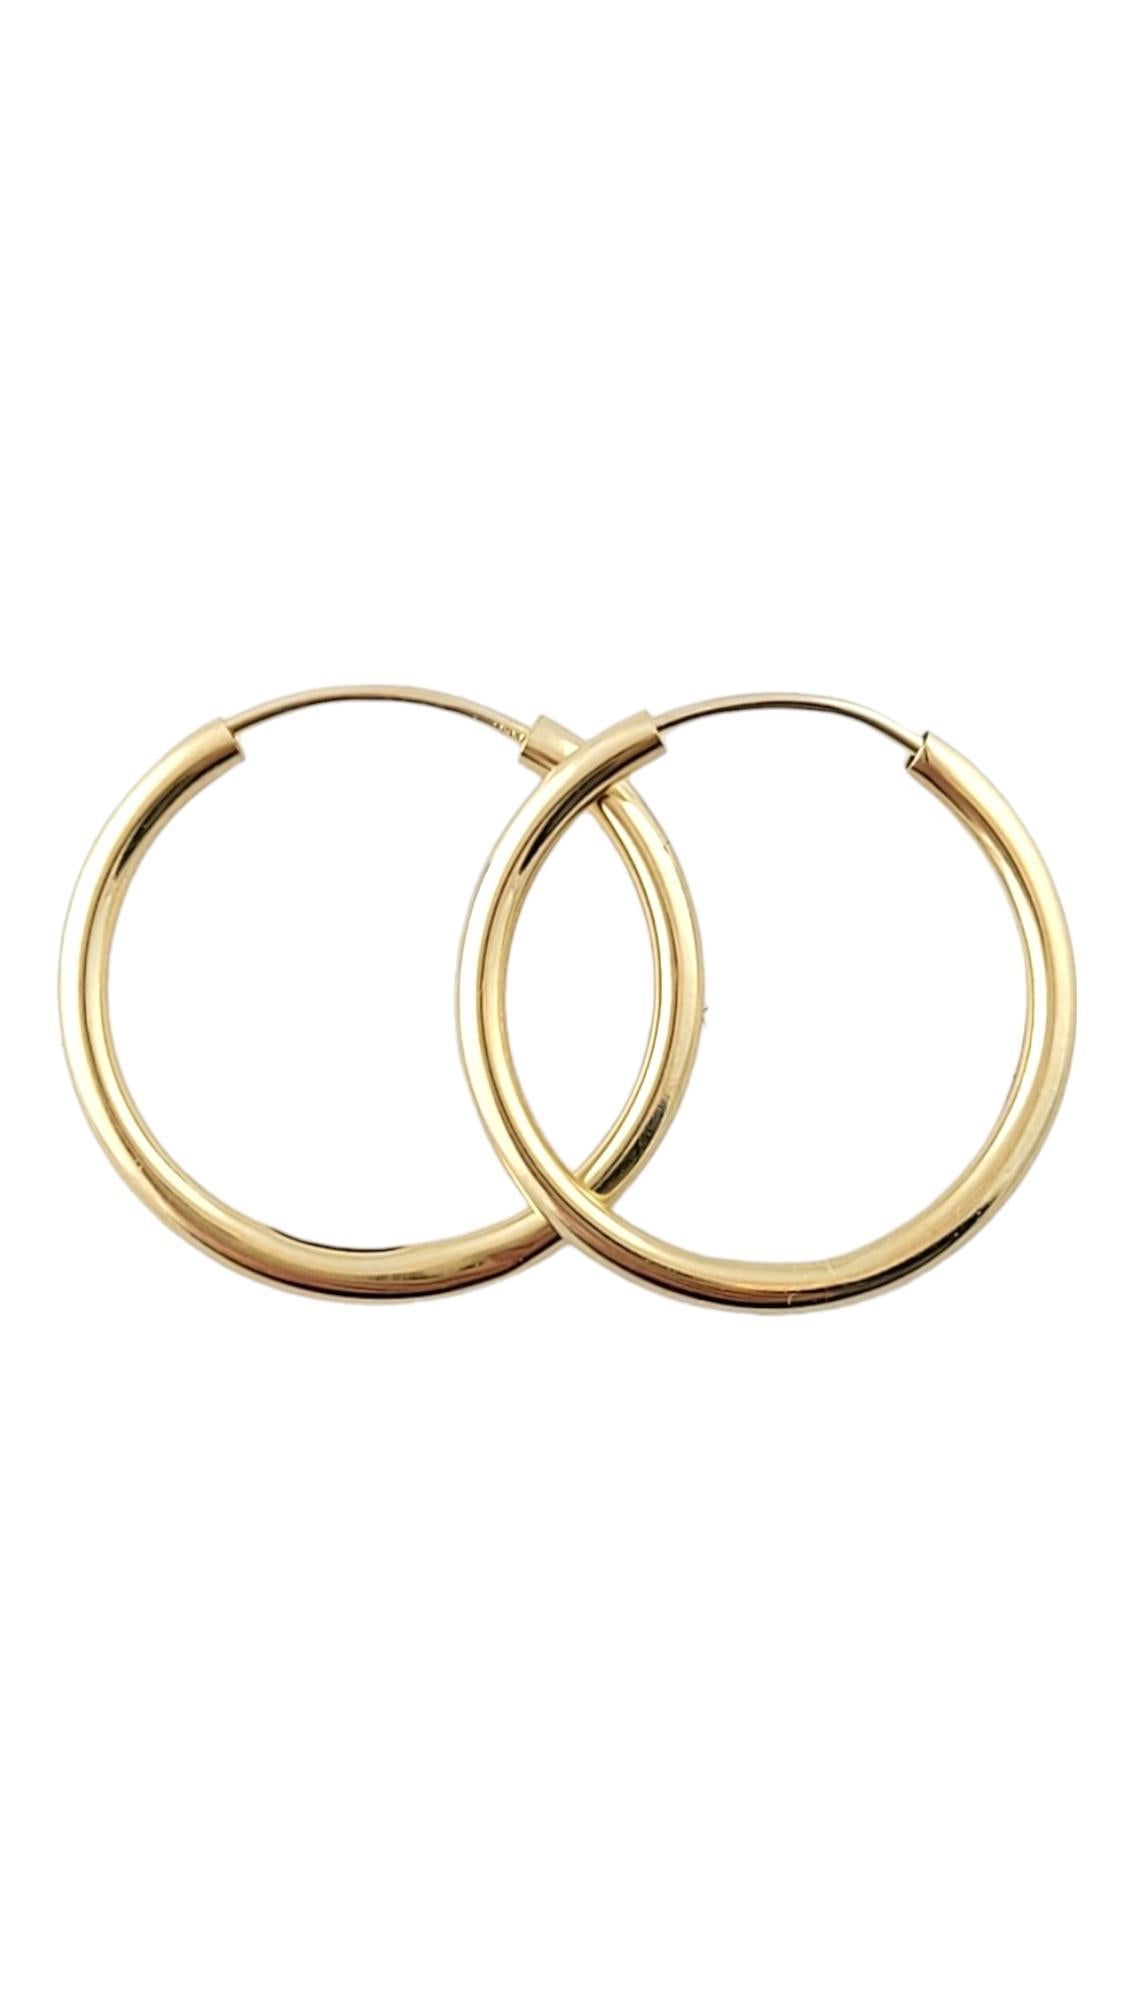 14K Yellow Gold Circle Hoop Earrings

These adorable, simple hoop earrings are crafted from 14K yellow gold for a gorgeous finish!

Diameter: 18.04mm
Width: 1.45mm

Weight: 0.30 dwt/ 0.46 g

Hallmark: ZZR 585

Very good condition, professionally